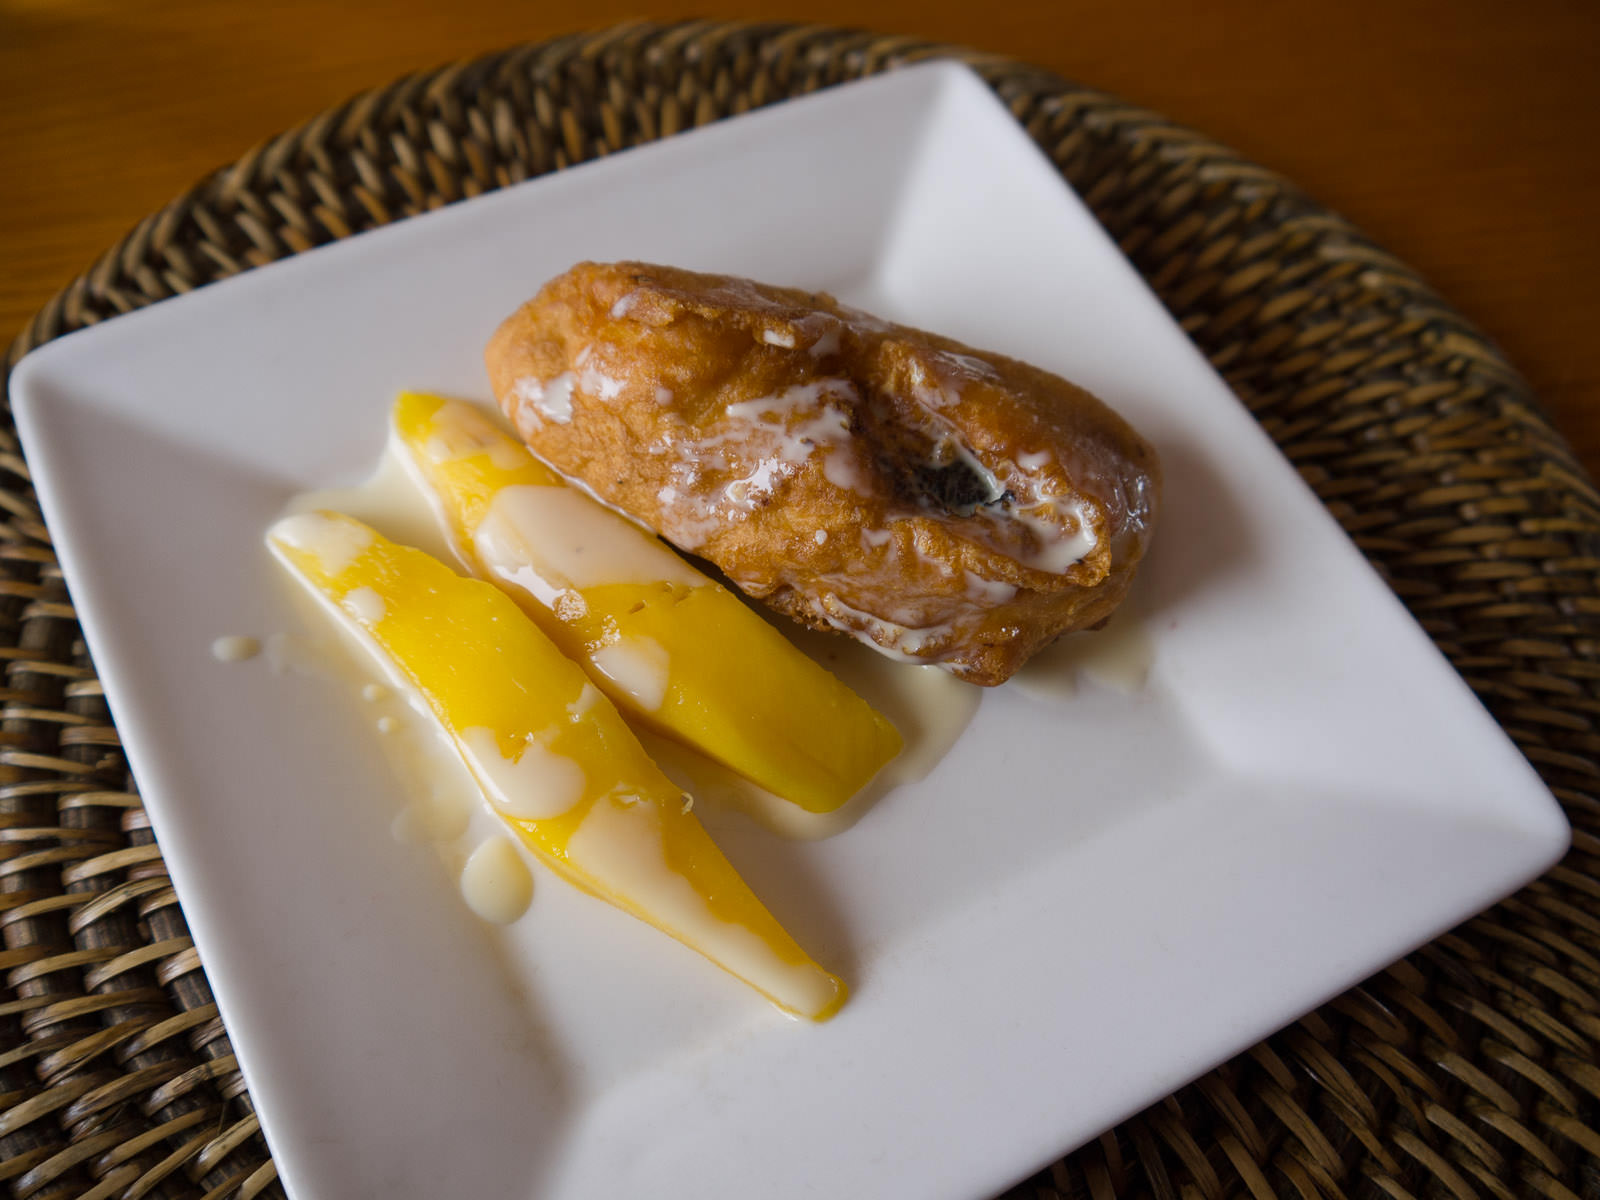 Mango and banana fritter with condensed milk